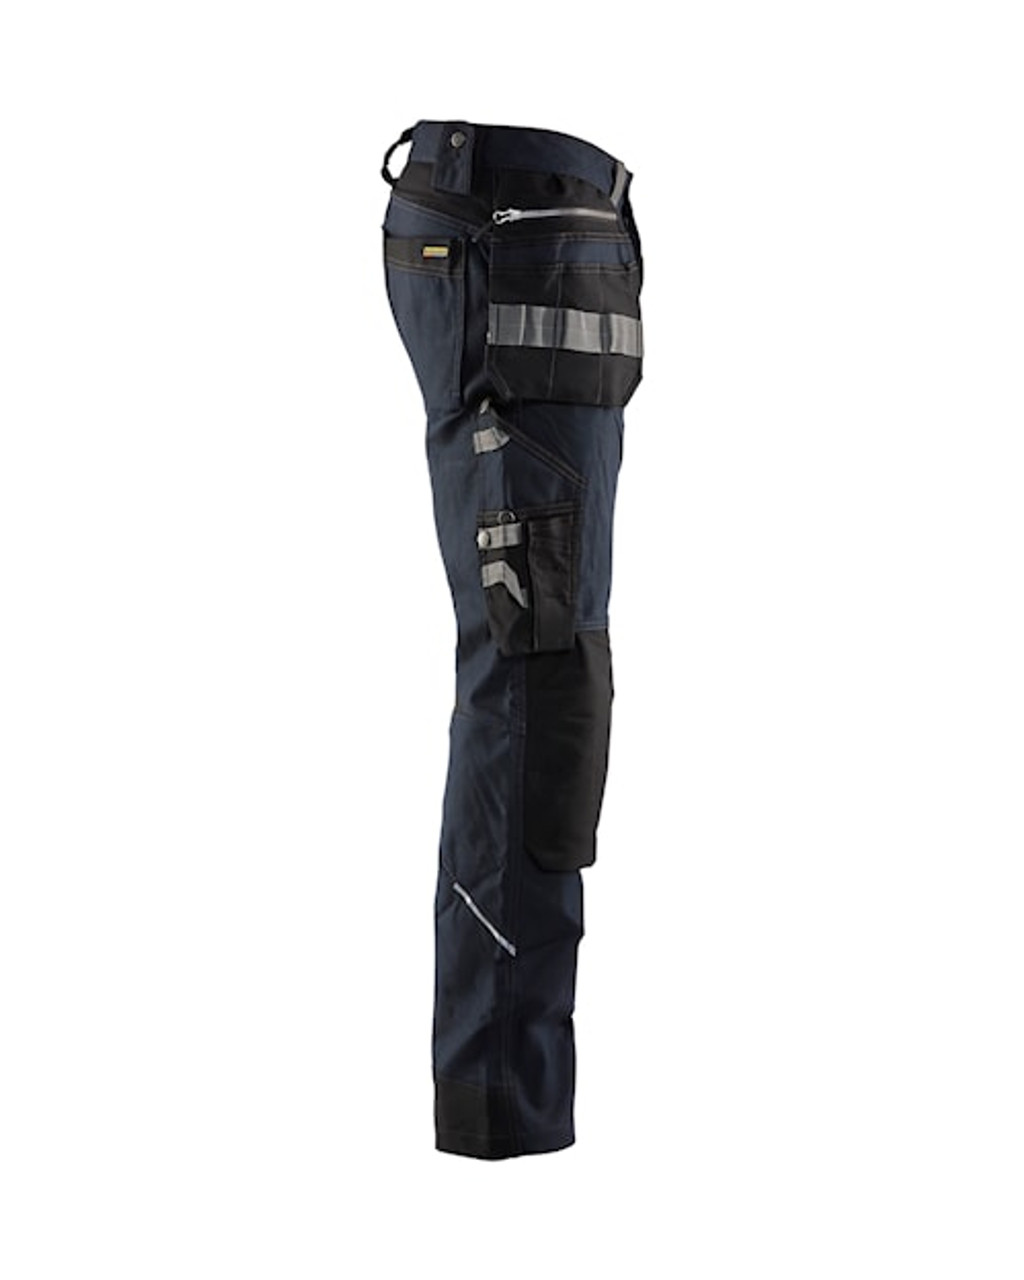 BLAKLADER Trousers | 1590  Trousers with Holster Pockets for Electricians, Plumbers in the Construction Jobs